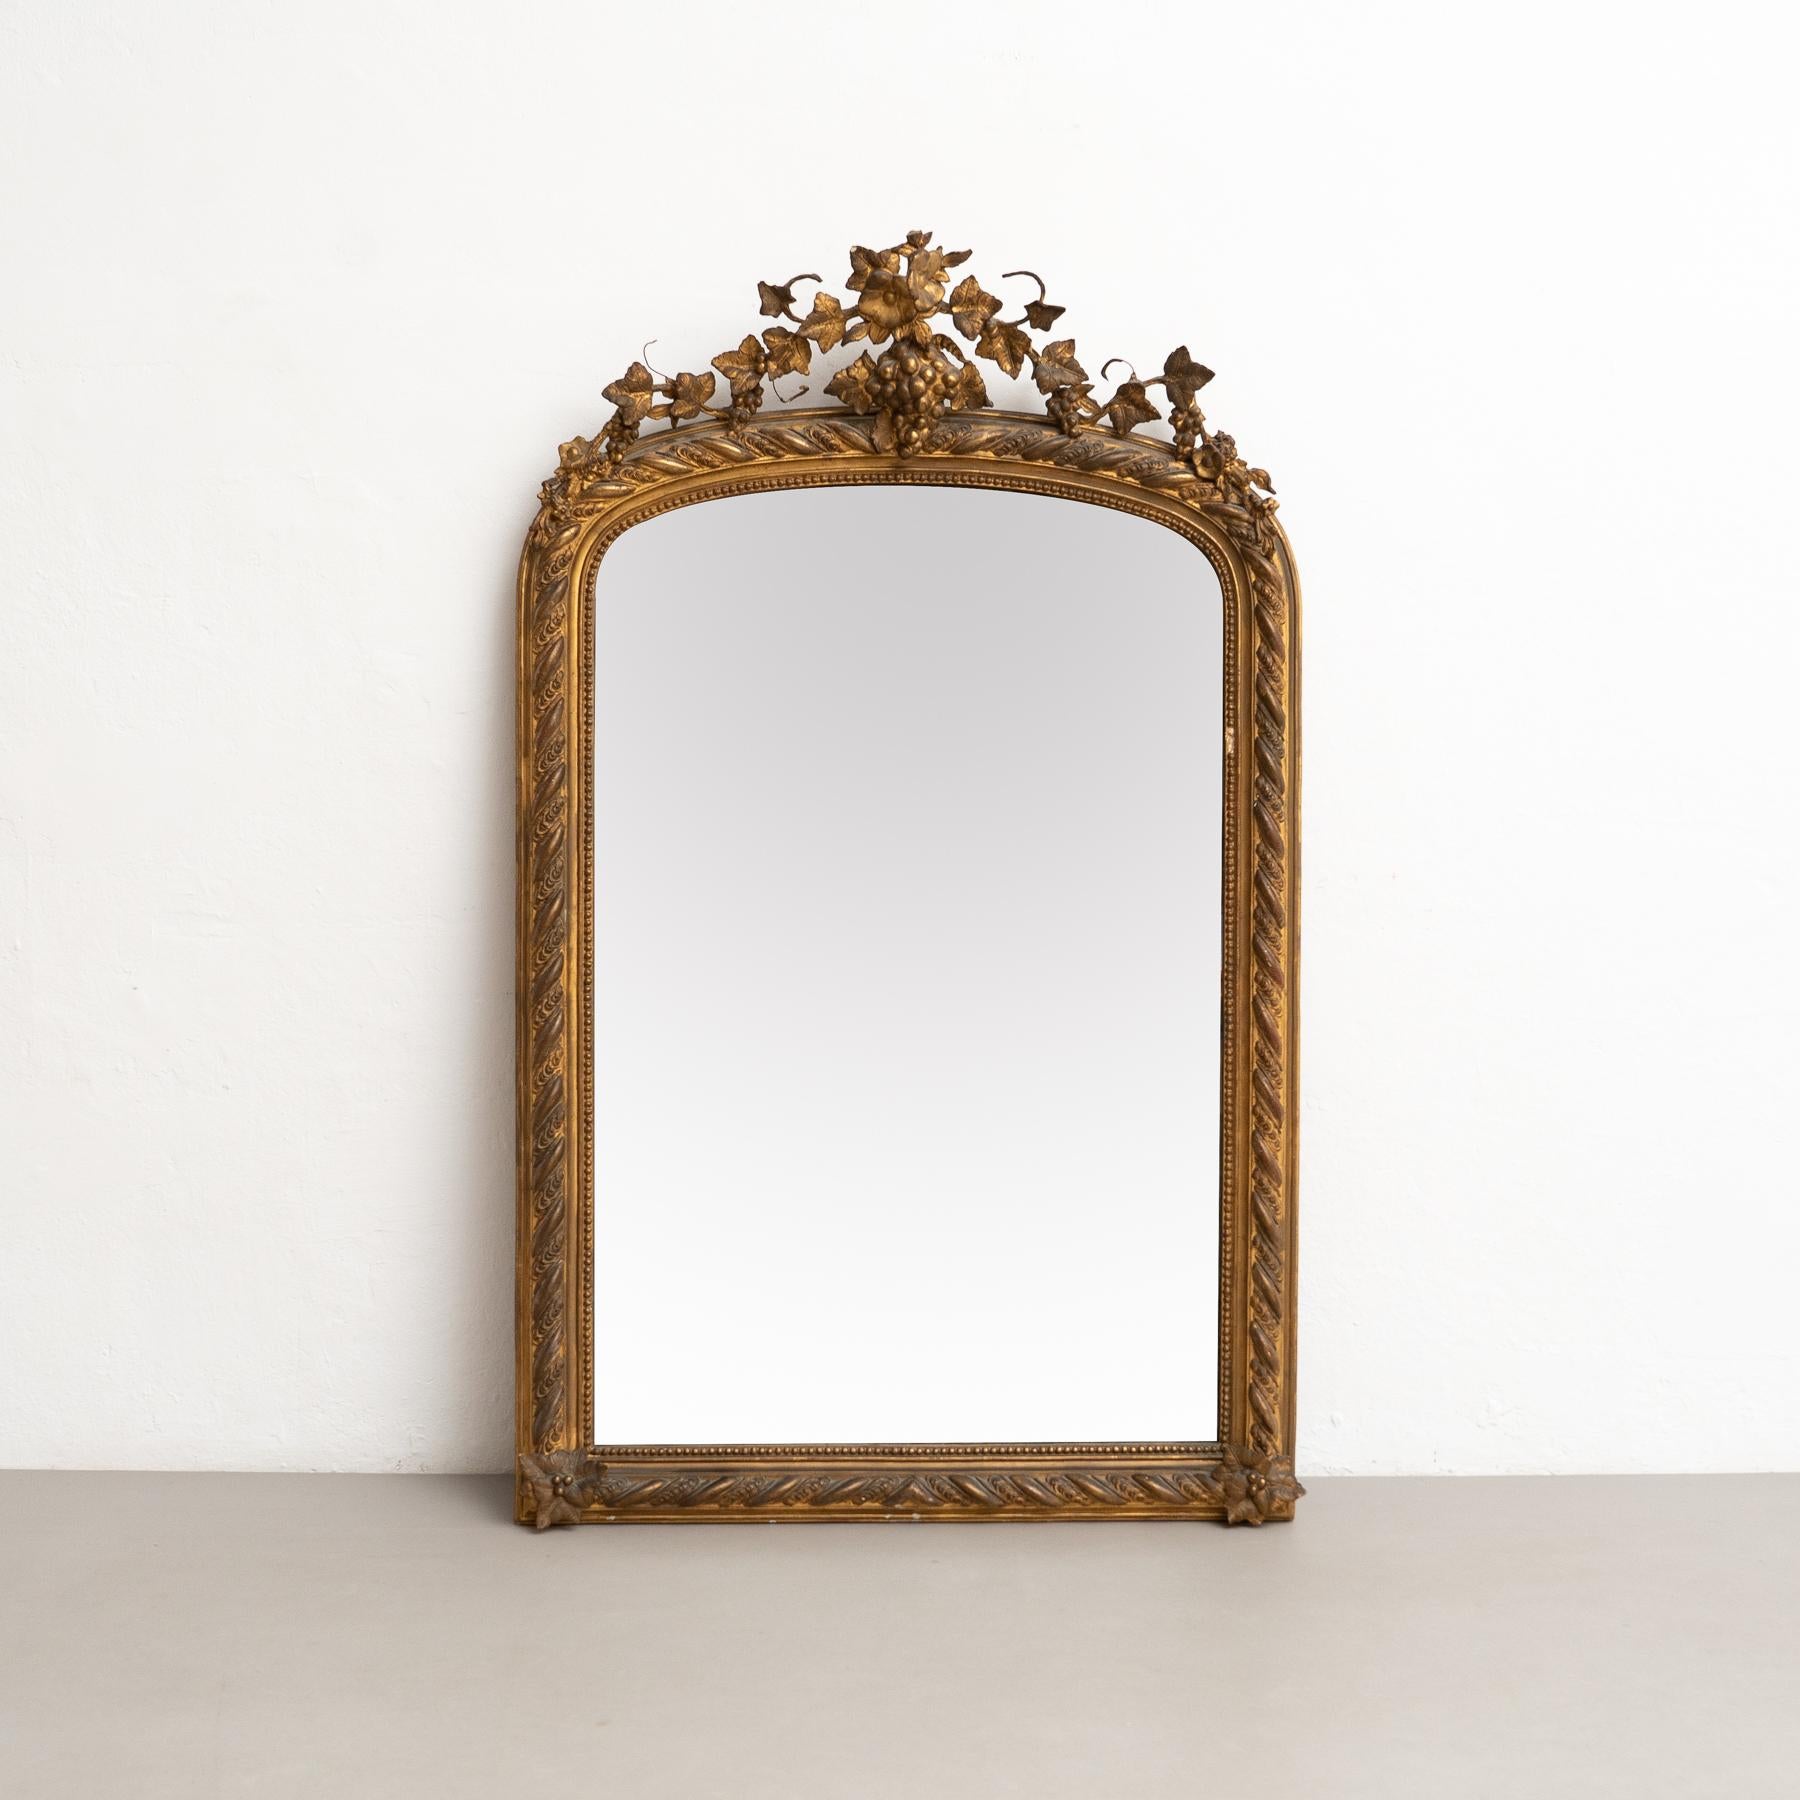 Antique Napoleon III Style Gilded Wood and Stucco Mirror, Early 20th Century

Enhance your decor with the timeless magnificence of this antique Napoleon III style mirror, boasting a lavish frame crafted from gilded wood and stucco, dating back to